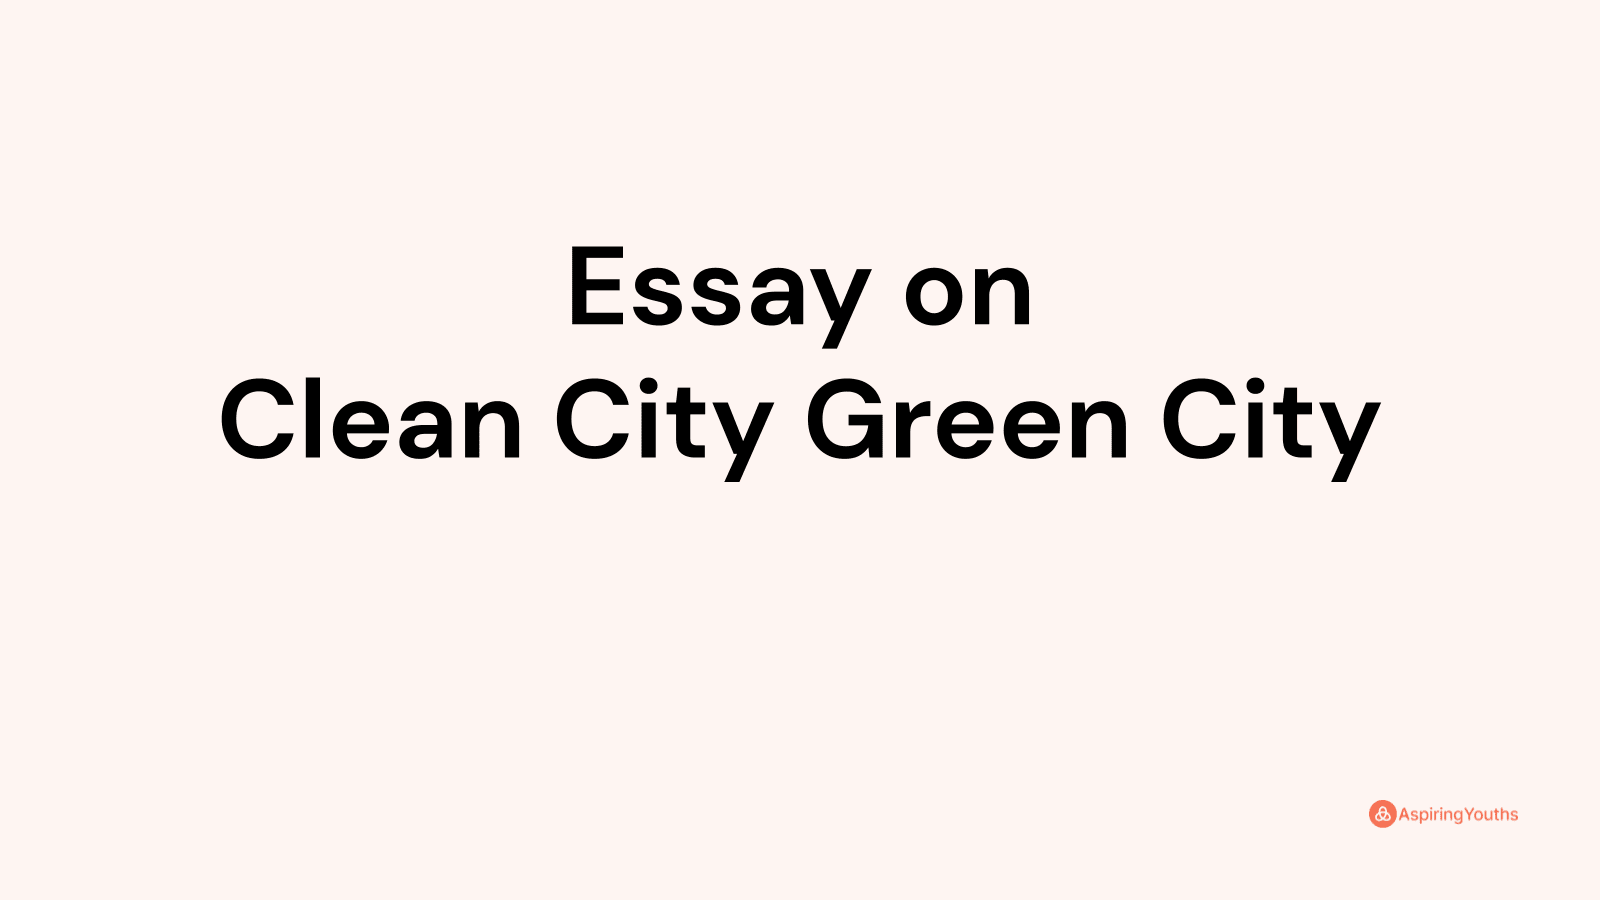 Essay on Clean City Green City